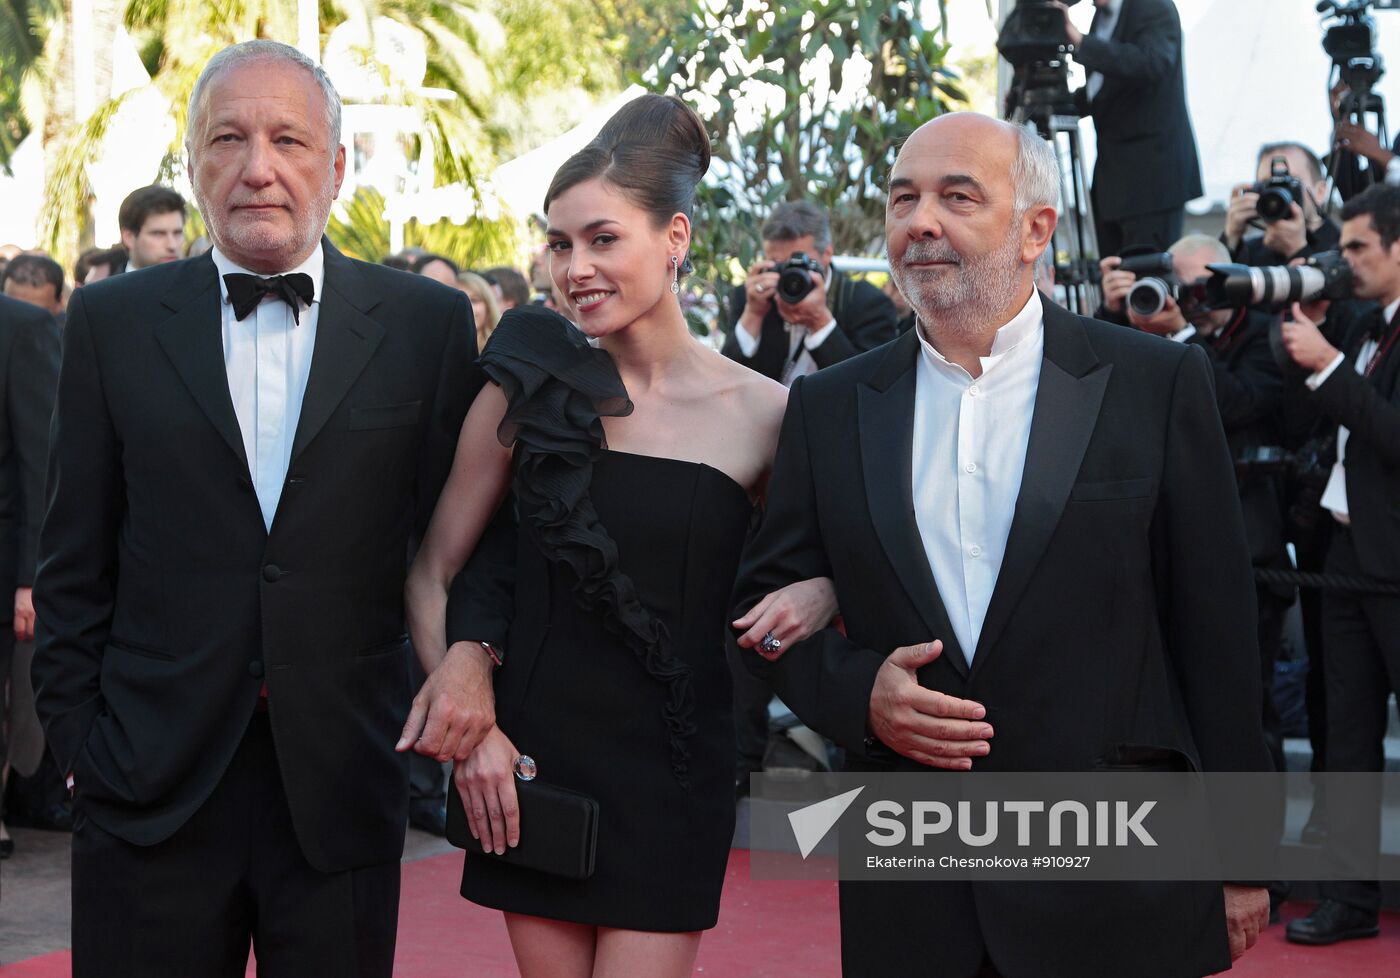 64th Cannes Film Festival